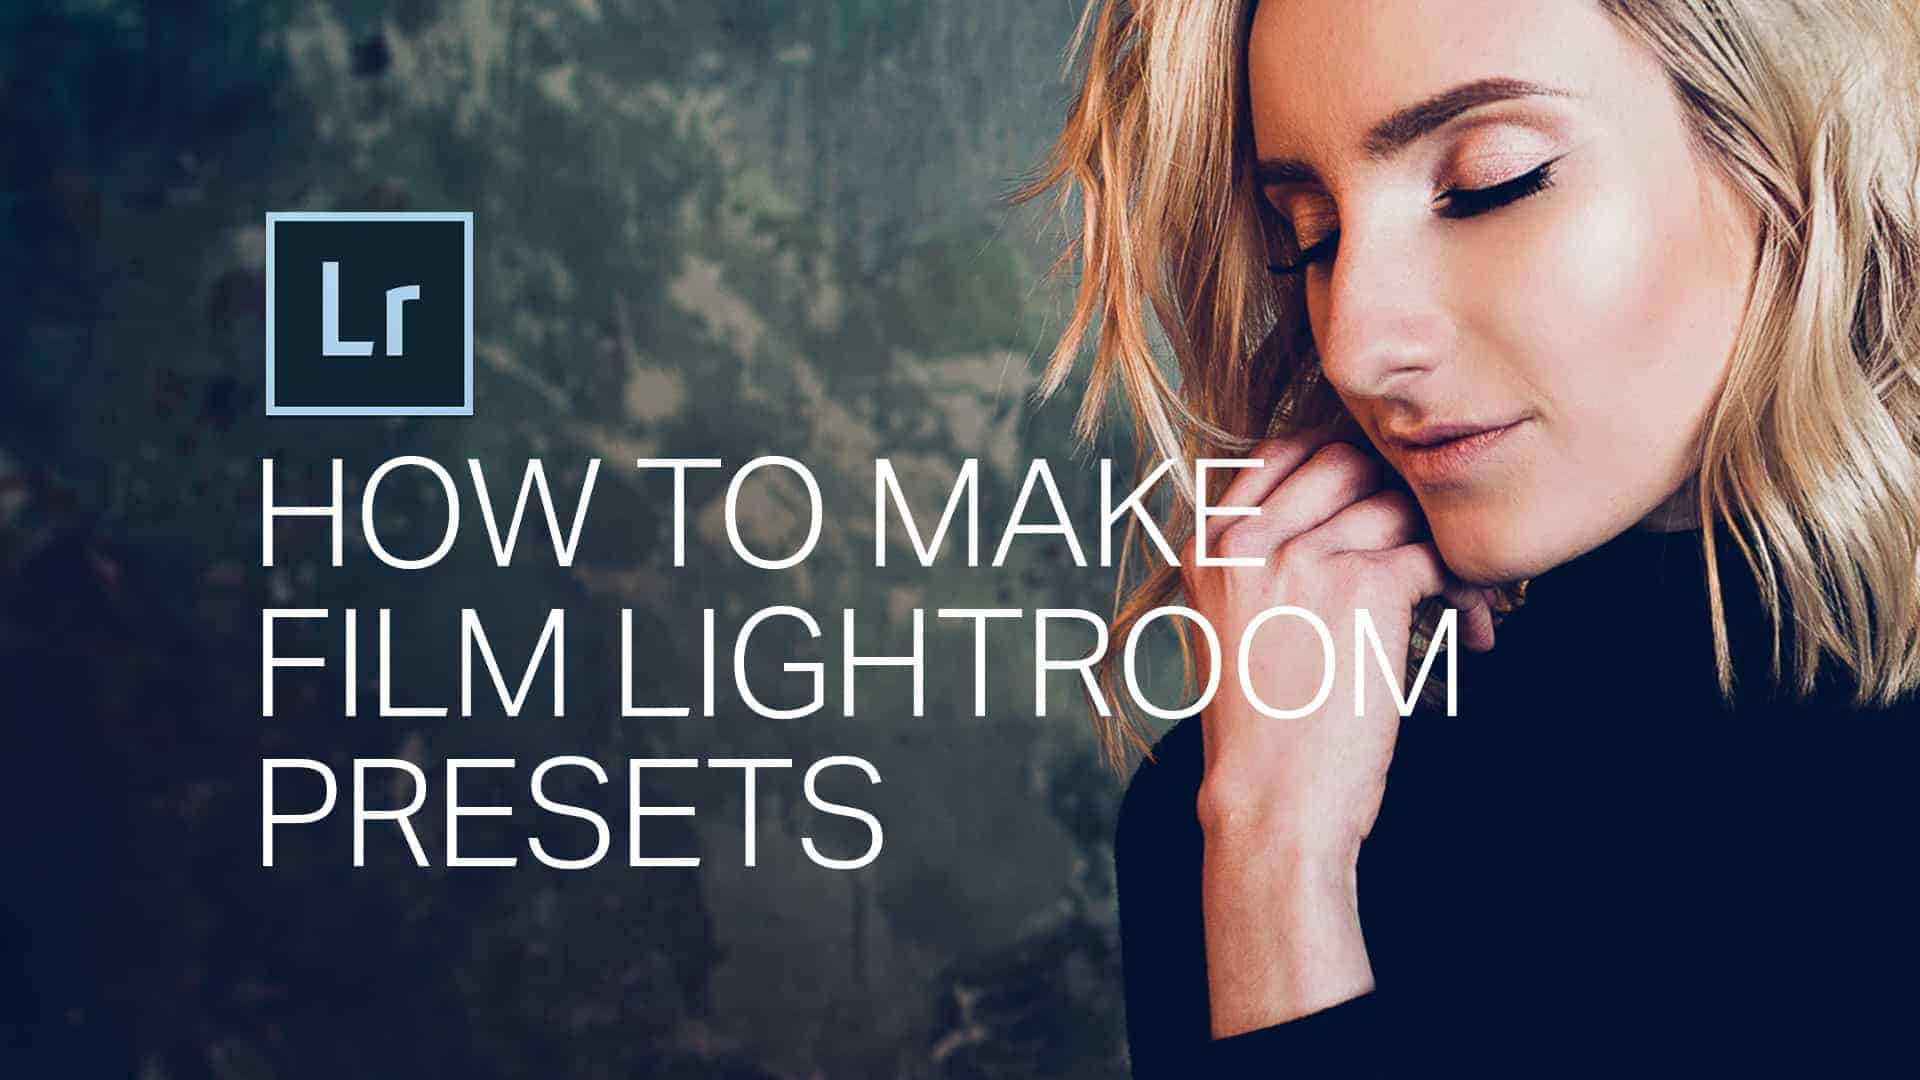 How to Create Your Own Film Presets in a Rational Step-by-Step Approach